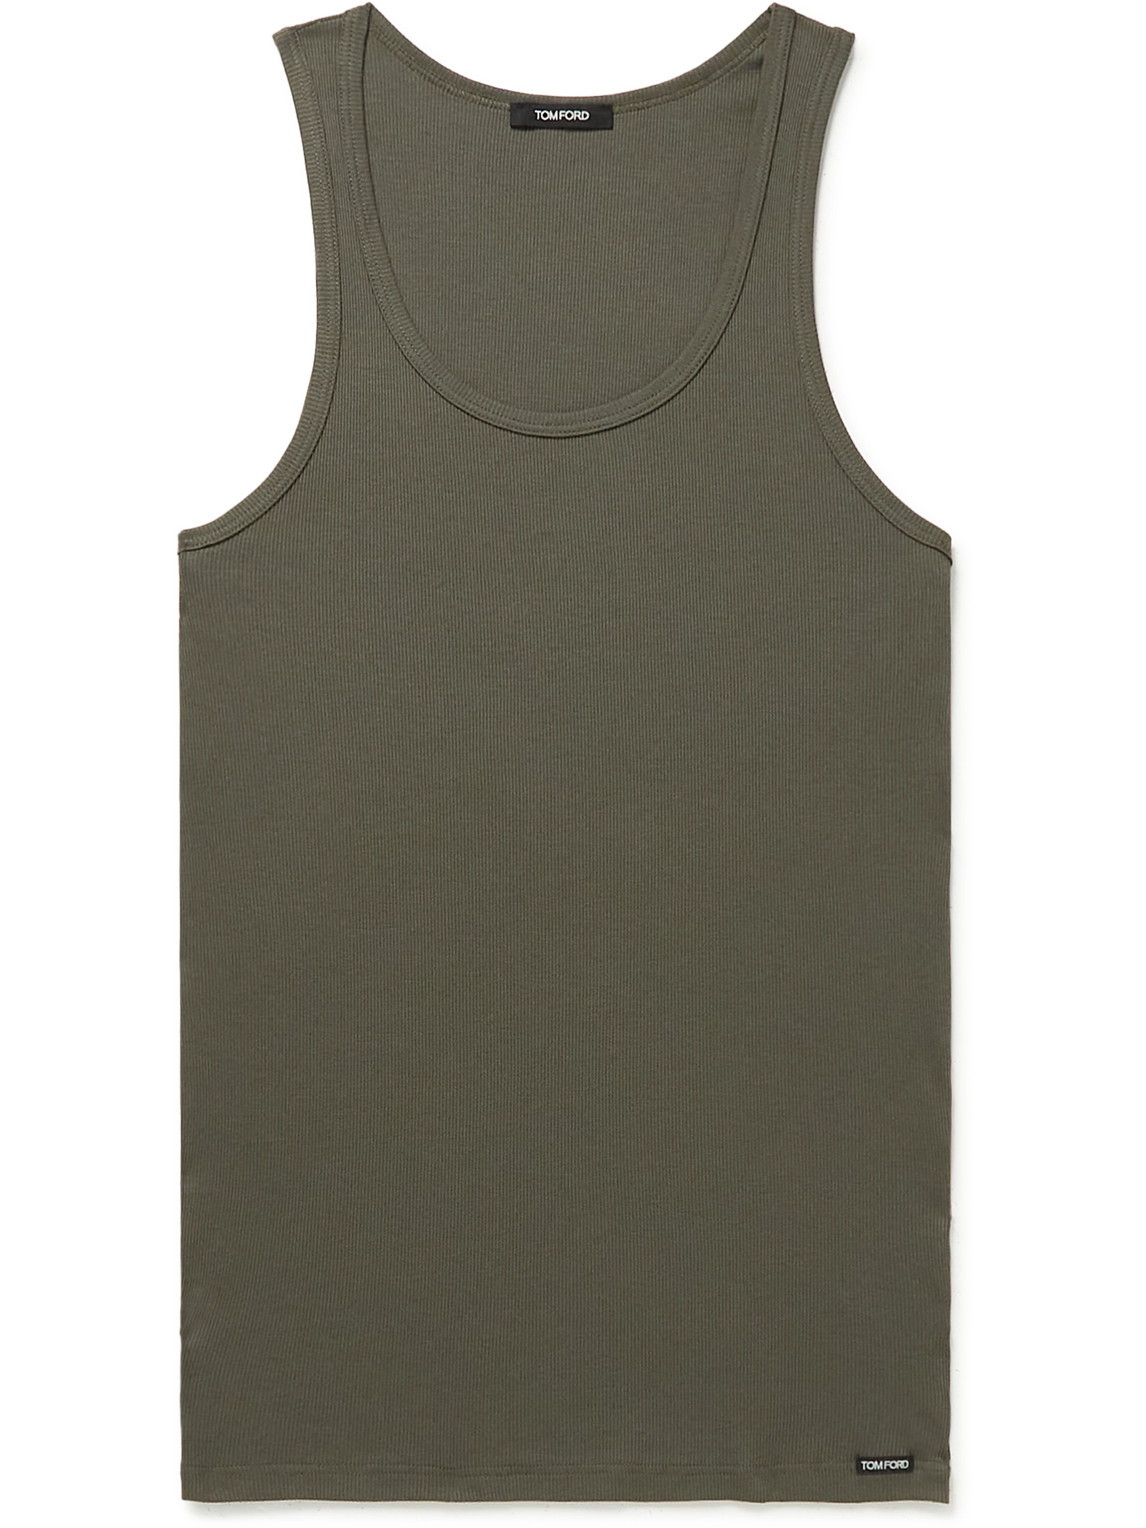 TOM FORD RIBBED COTTON AND MODAL-BLEND TANK TOP